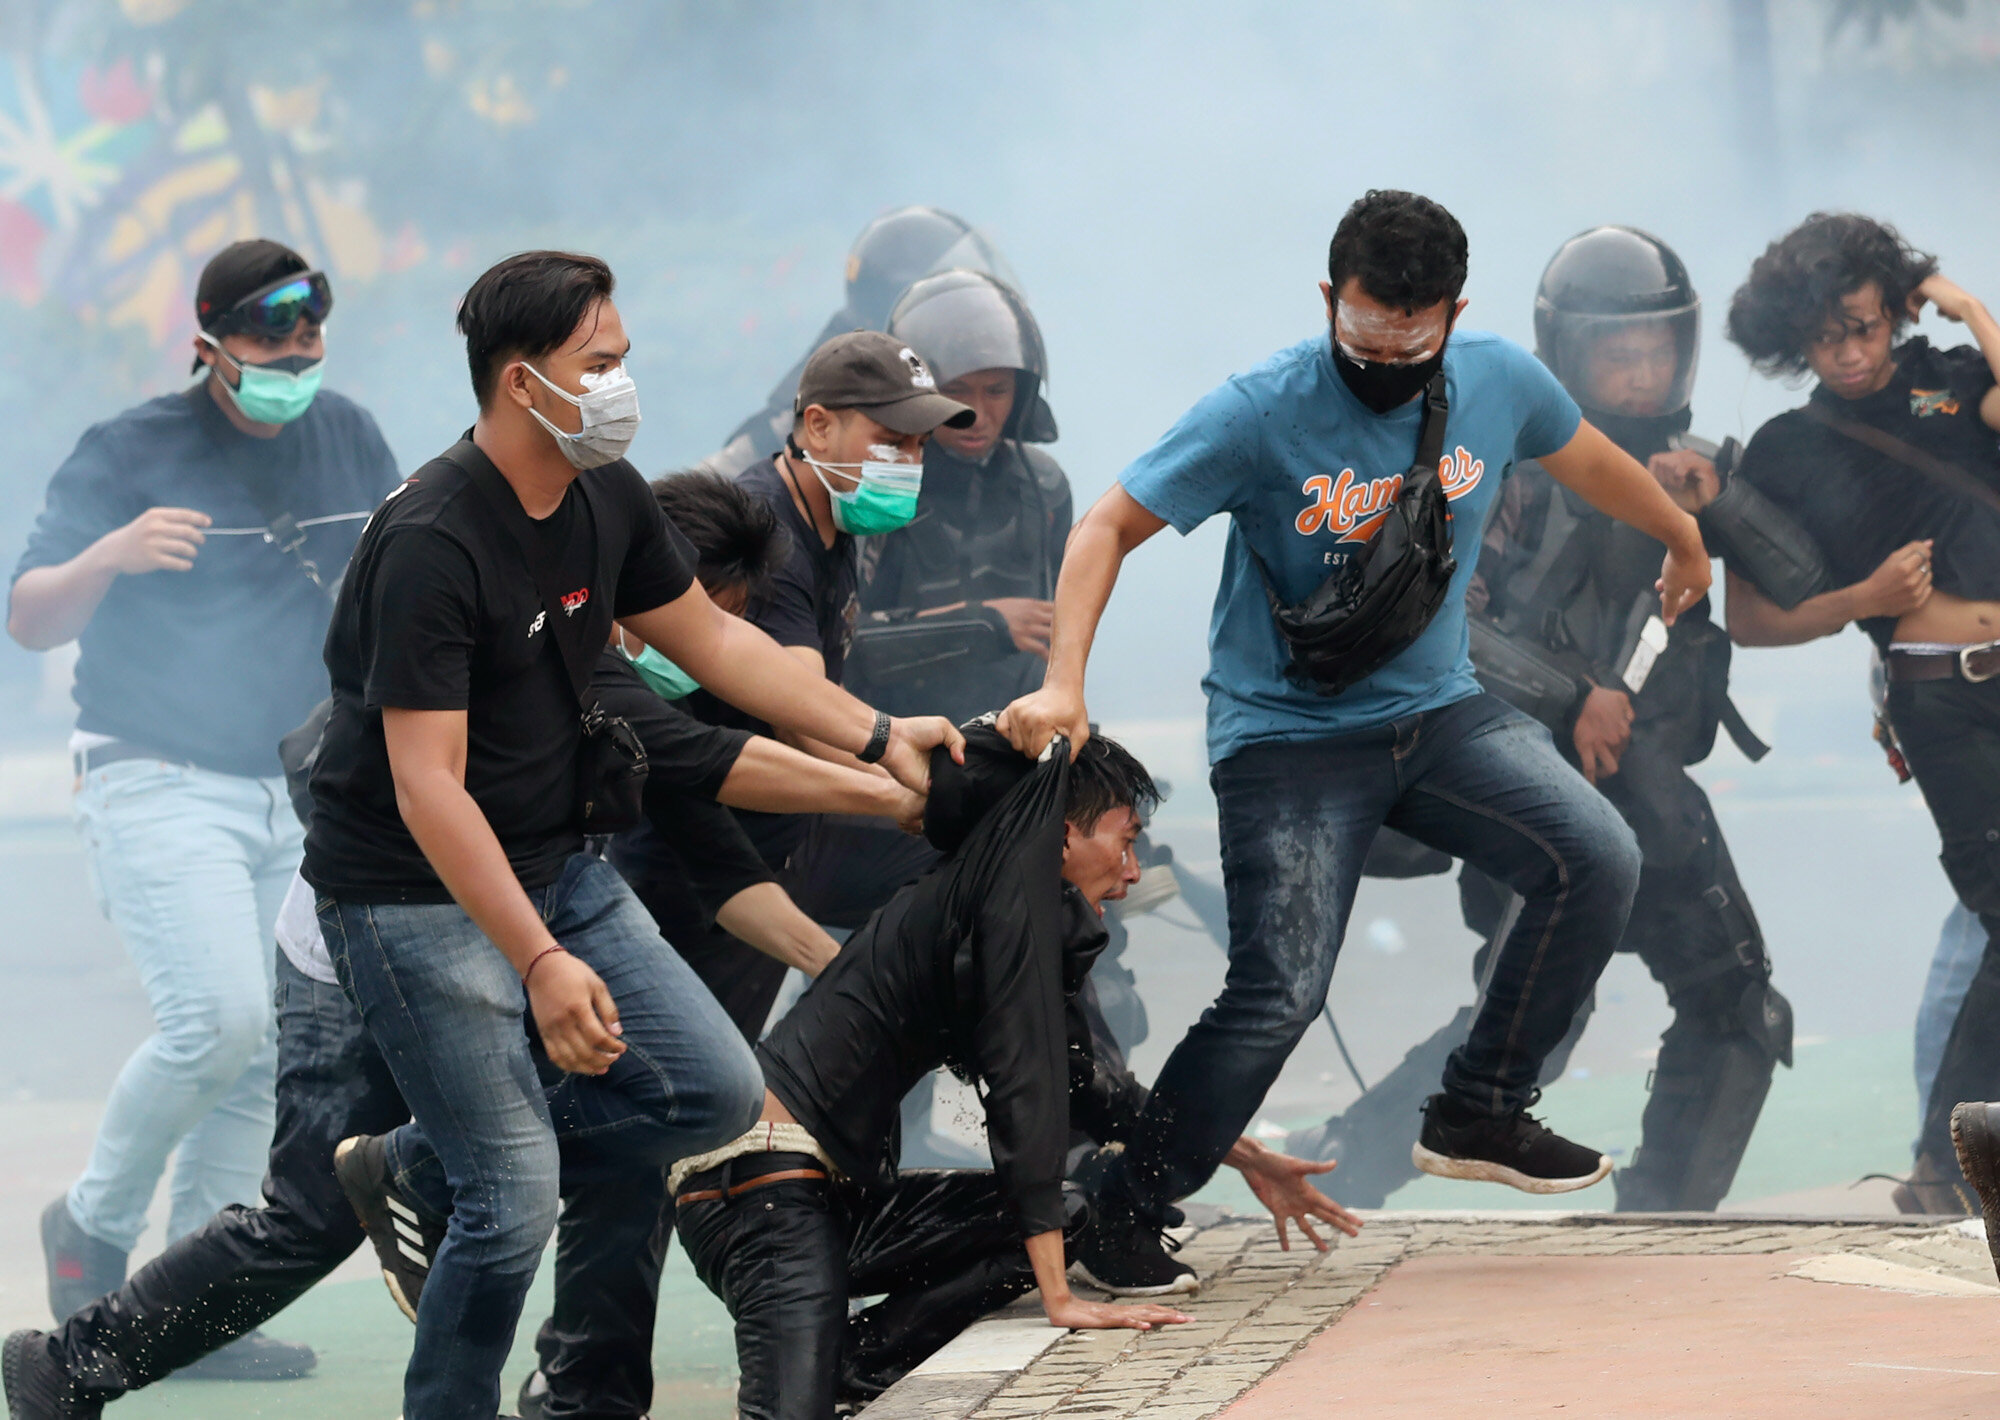  Plainclothes police officers detain demonstrators in Jakarta, Indonesia, on Oct. 8, 2020, during a protest against a new law they say will cripple labor rights and harm the environment. (AP Photo/Tatan Syuflana) 